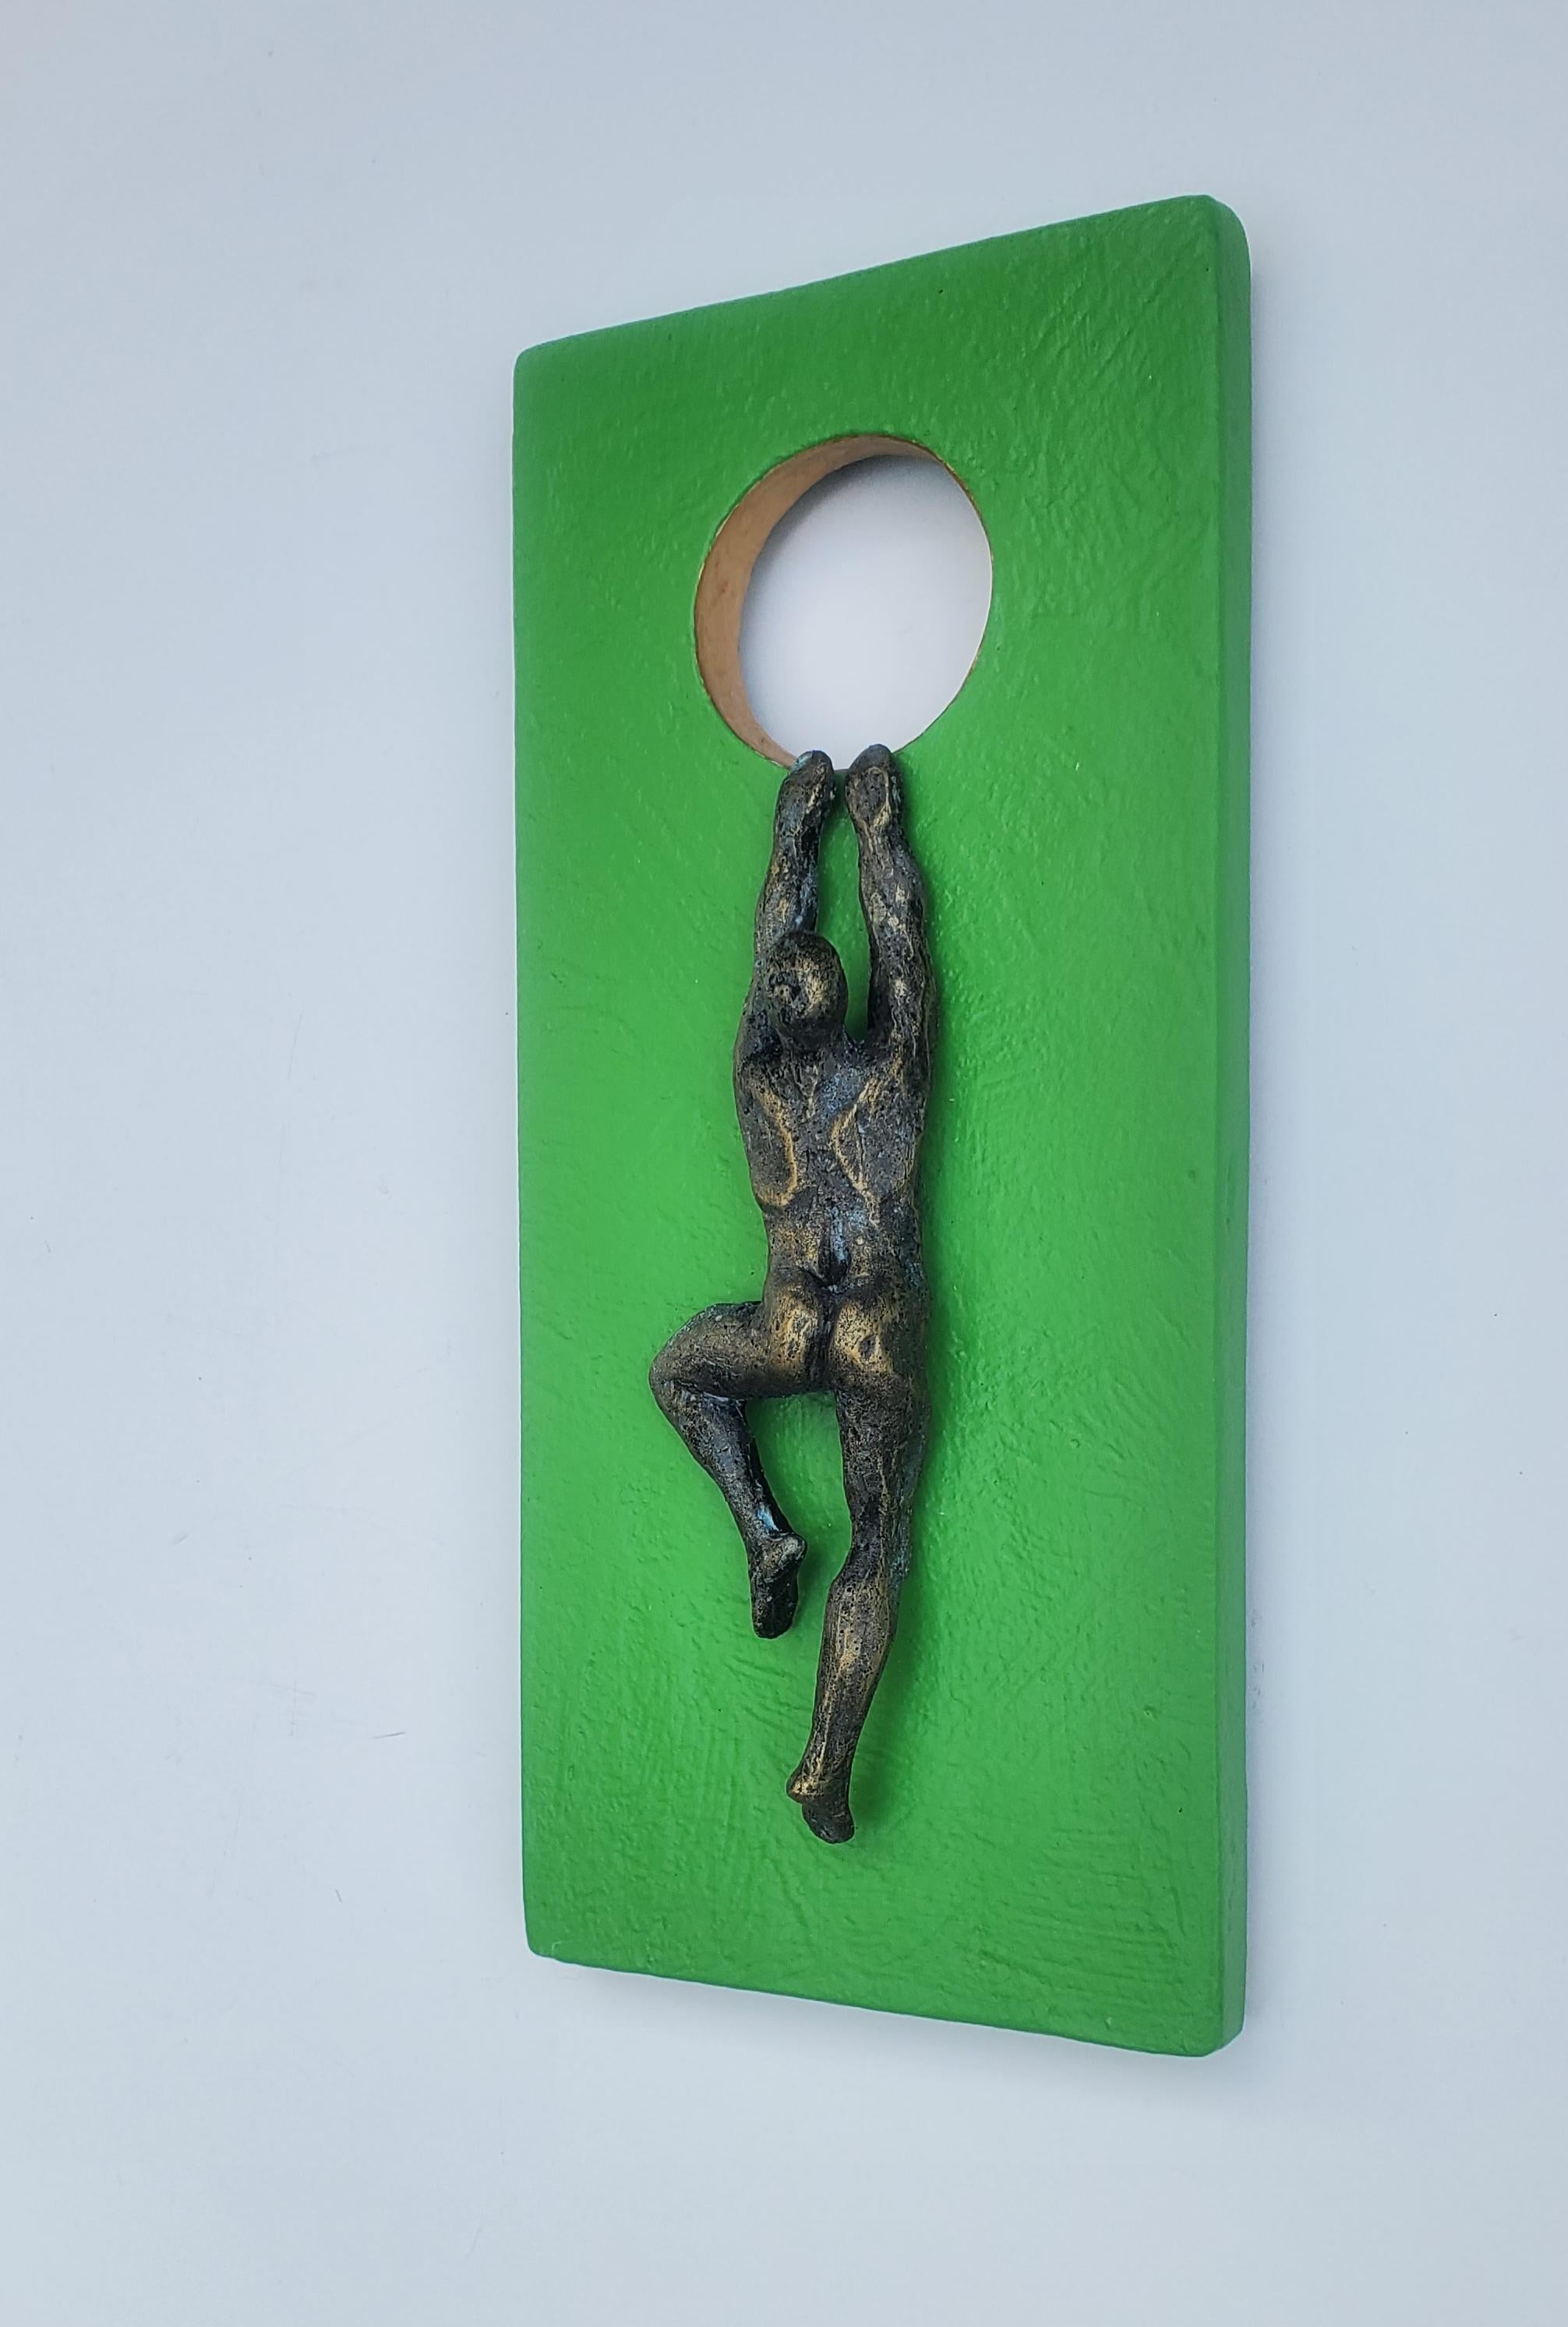 Climber on Green Hanging on the Moon., Original Painting - Contemporary Mixed Media Art by Yelitza Diaz